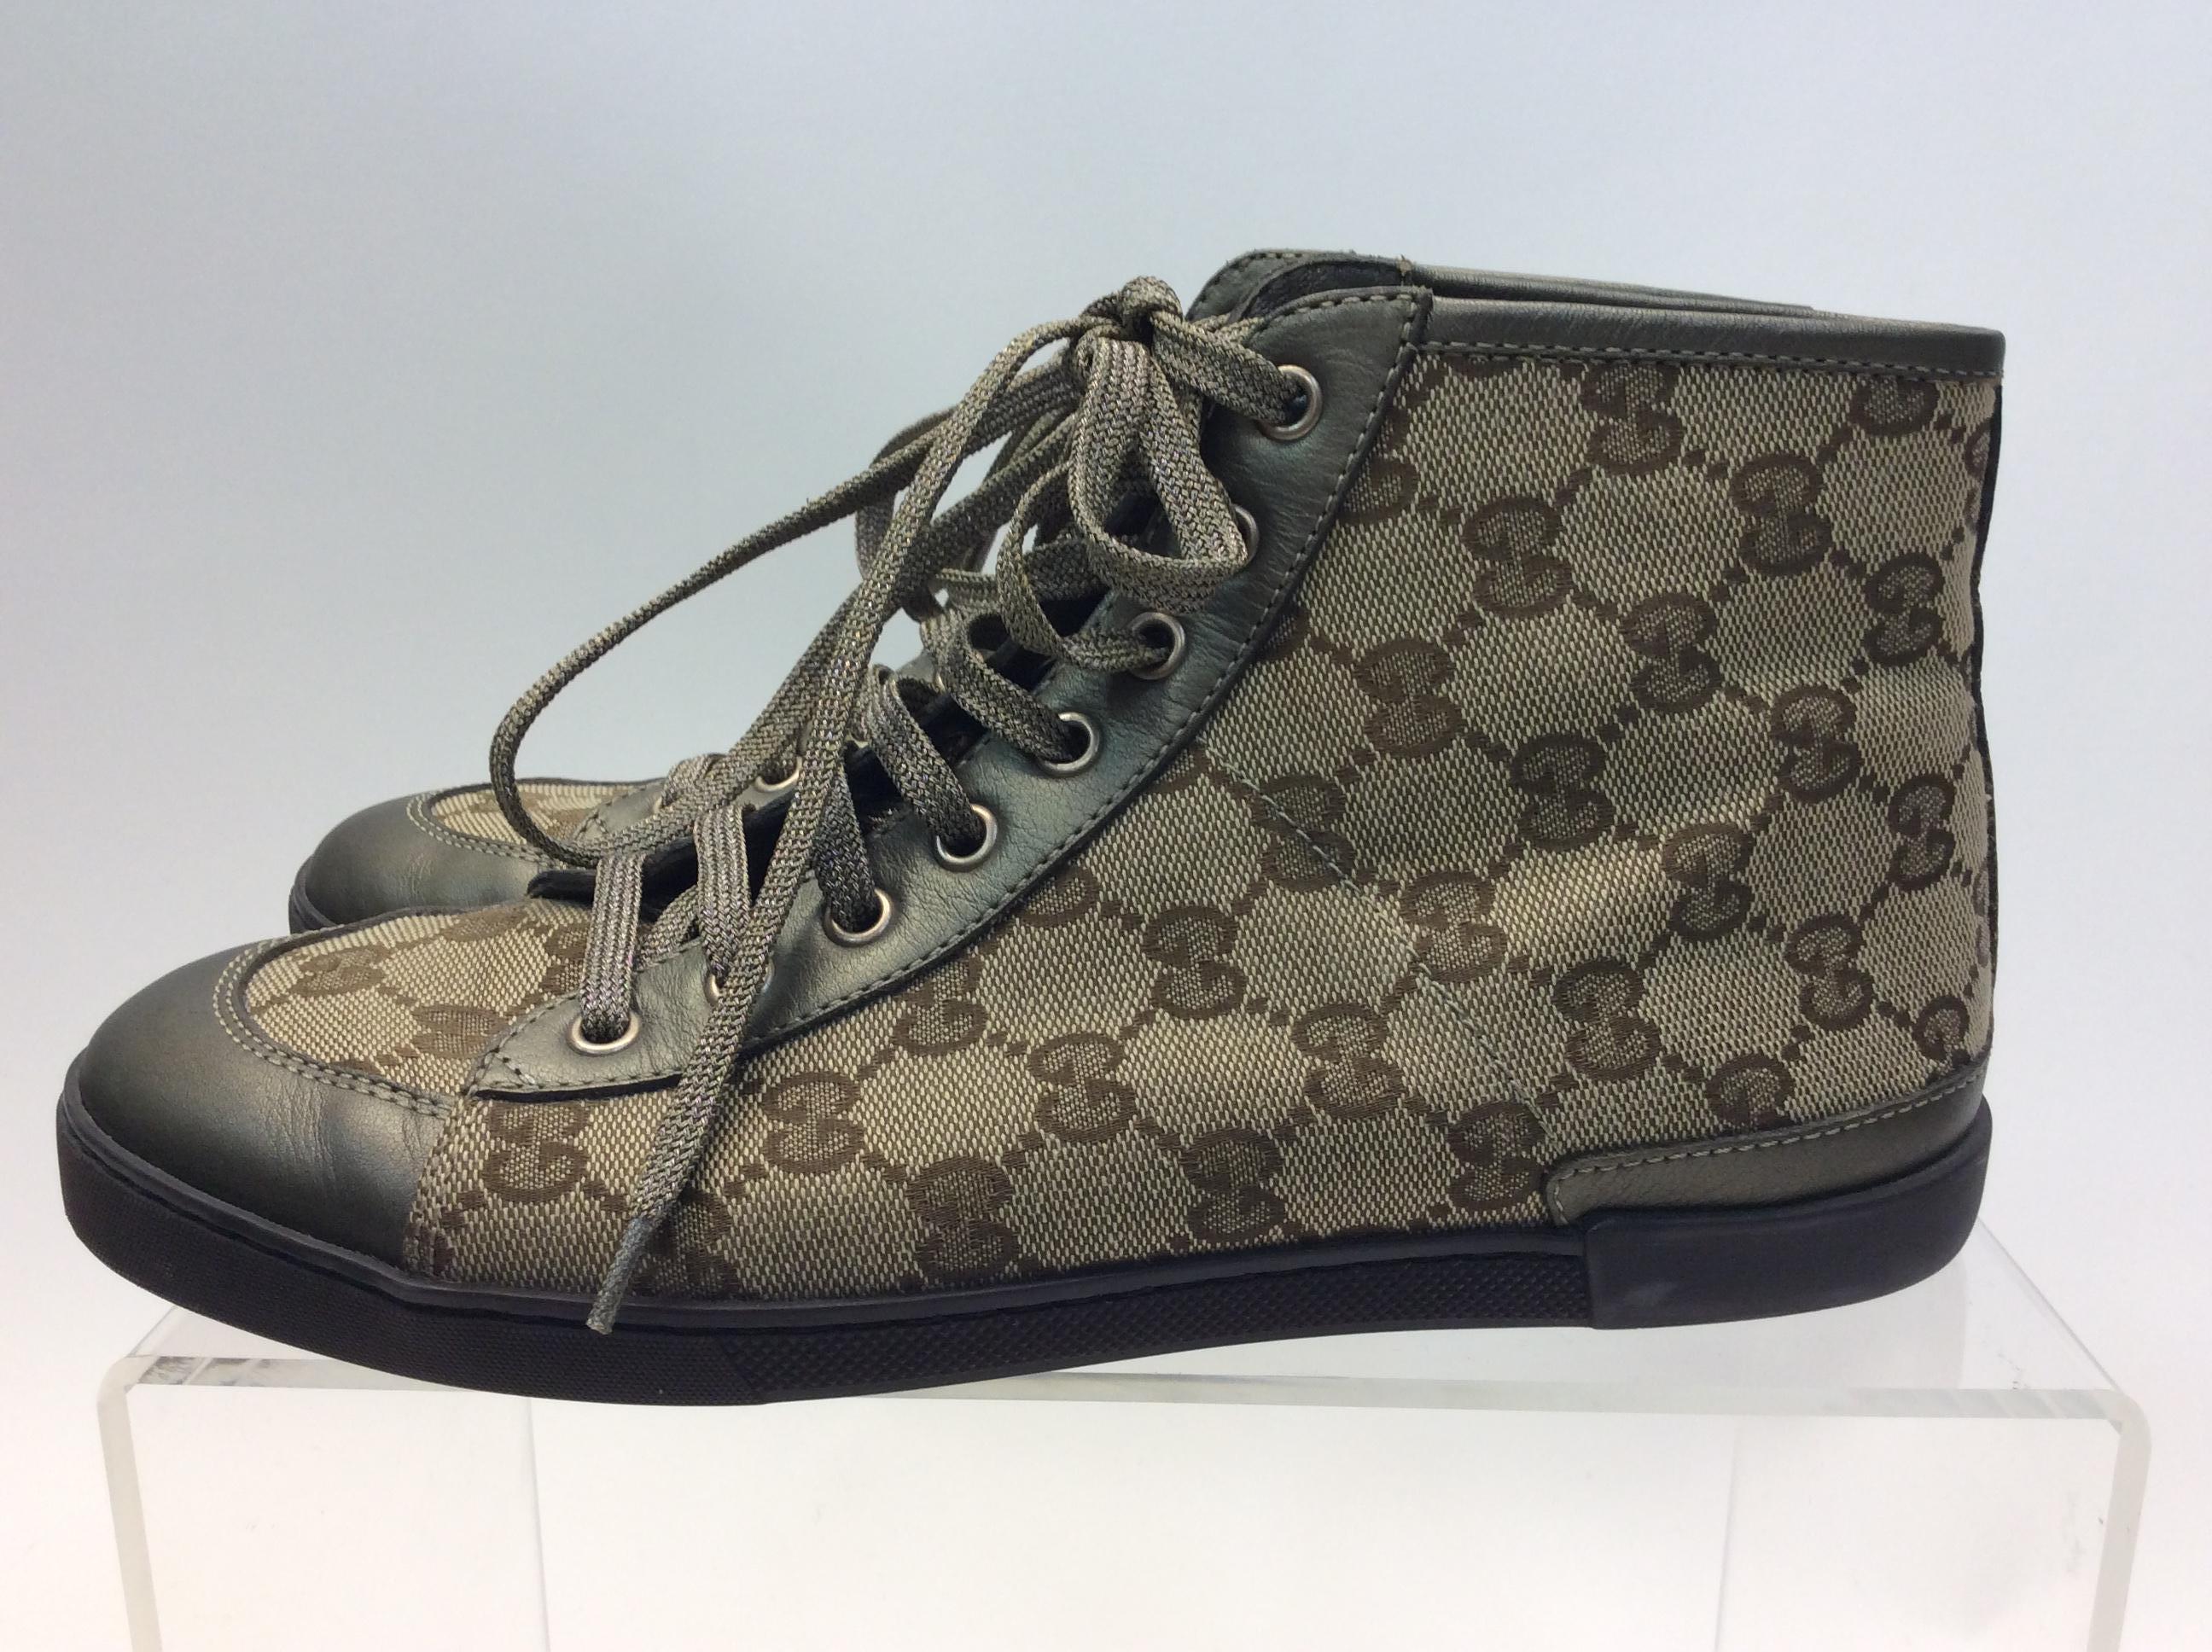 Gucci Tan Monogram High Top Sneakers
$299
Made in Italy
Size 37